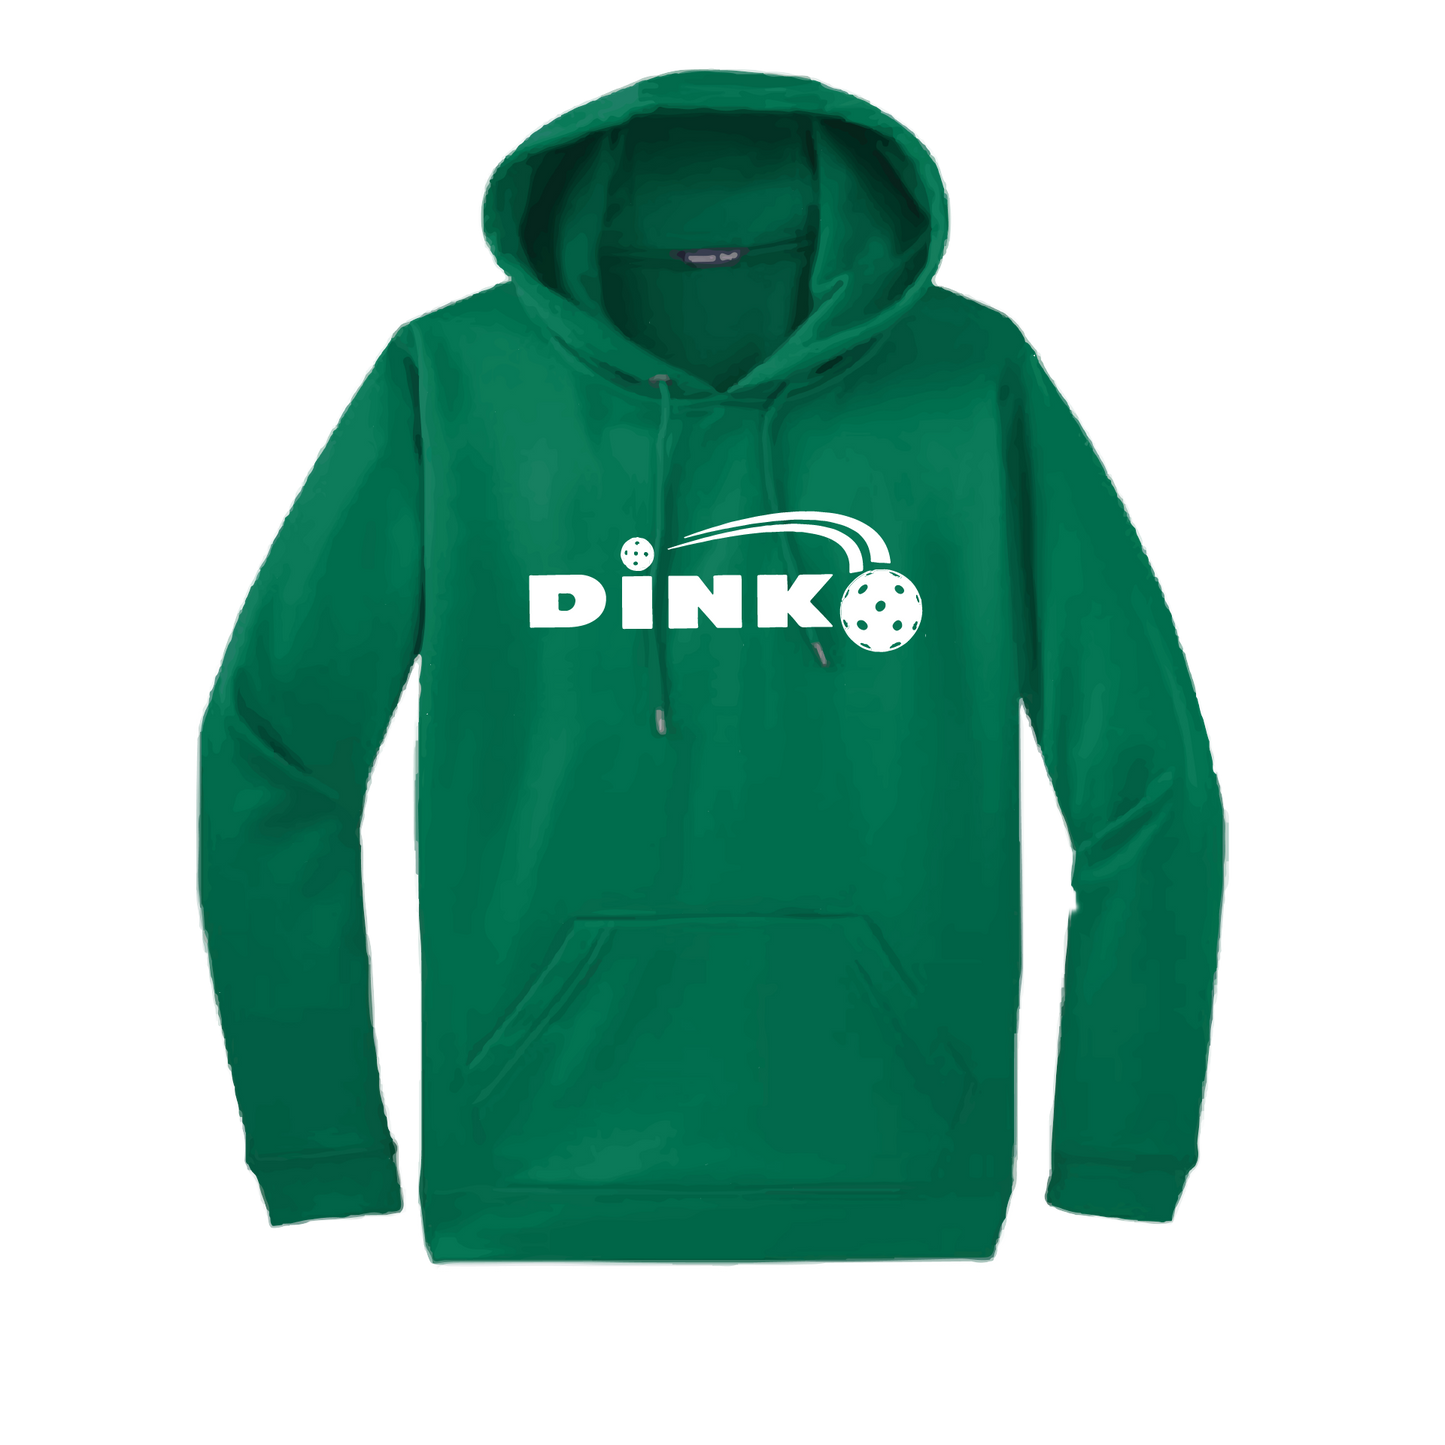 Pickeball Design: Dink  Unisex Hooded Sweatshirt: Moisture-wicking, double-lined hood, front pouch pocket.  This unisex hooded sweatshirt is ultra comfortable and soft. Stay warm on the Pickleball courts while being that hit with this one of kind design.